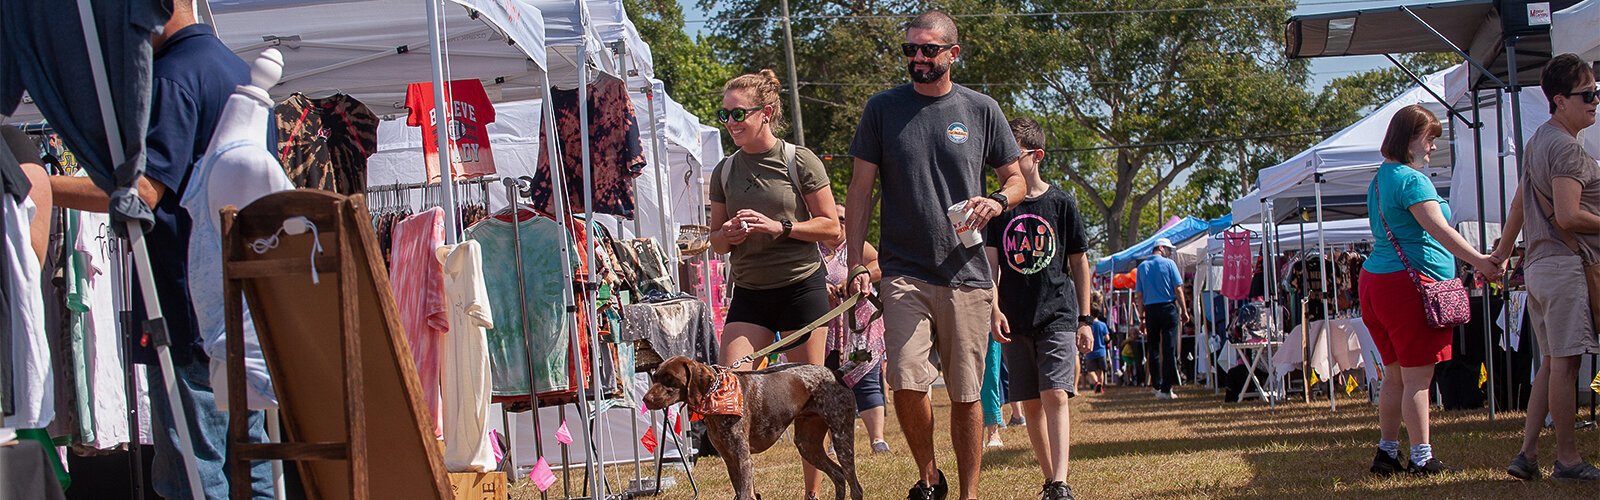 Alee Al-Raee of Largo walks his German short-haired pointer “Jasper” among the vendors at The Marker Marie on Saturday. Alee was with his 11-year old son, Arriq Al-Raee, and fiancé, Erin Gyros.